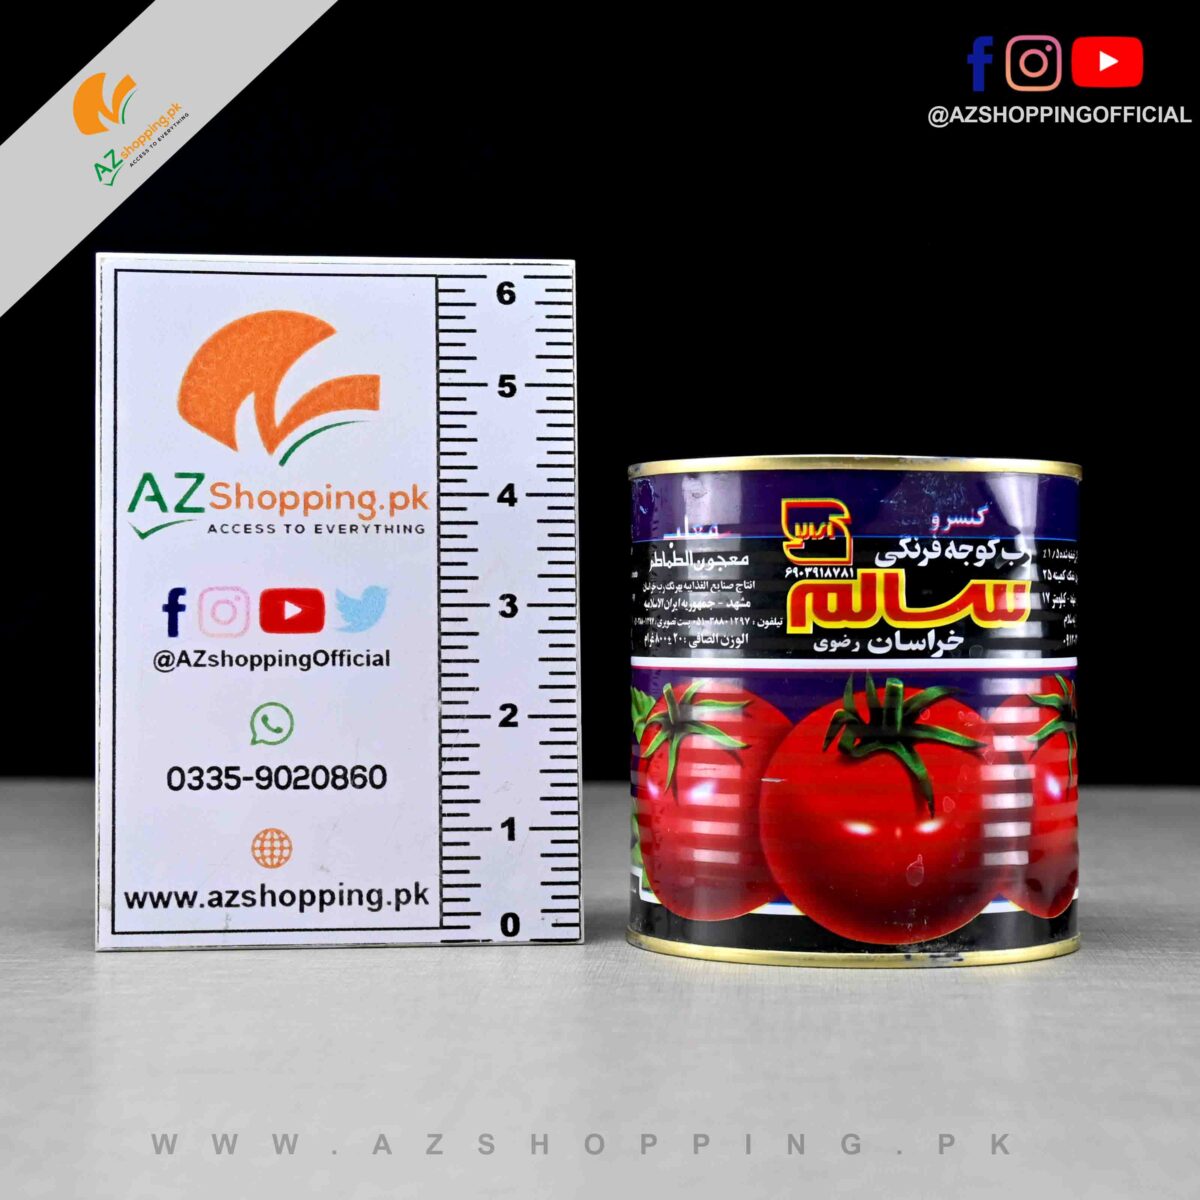 Canned Tomato Paste – Net Weight: 800g